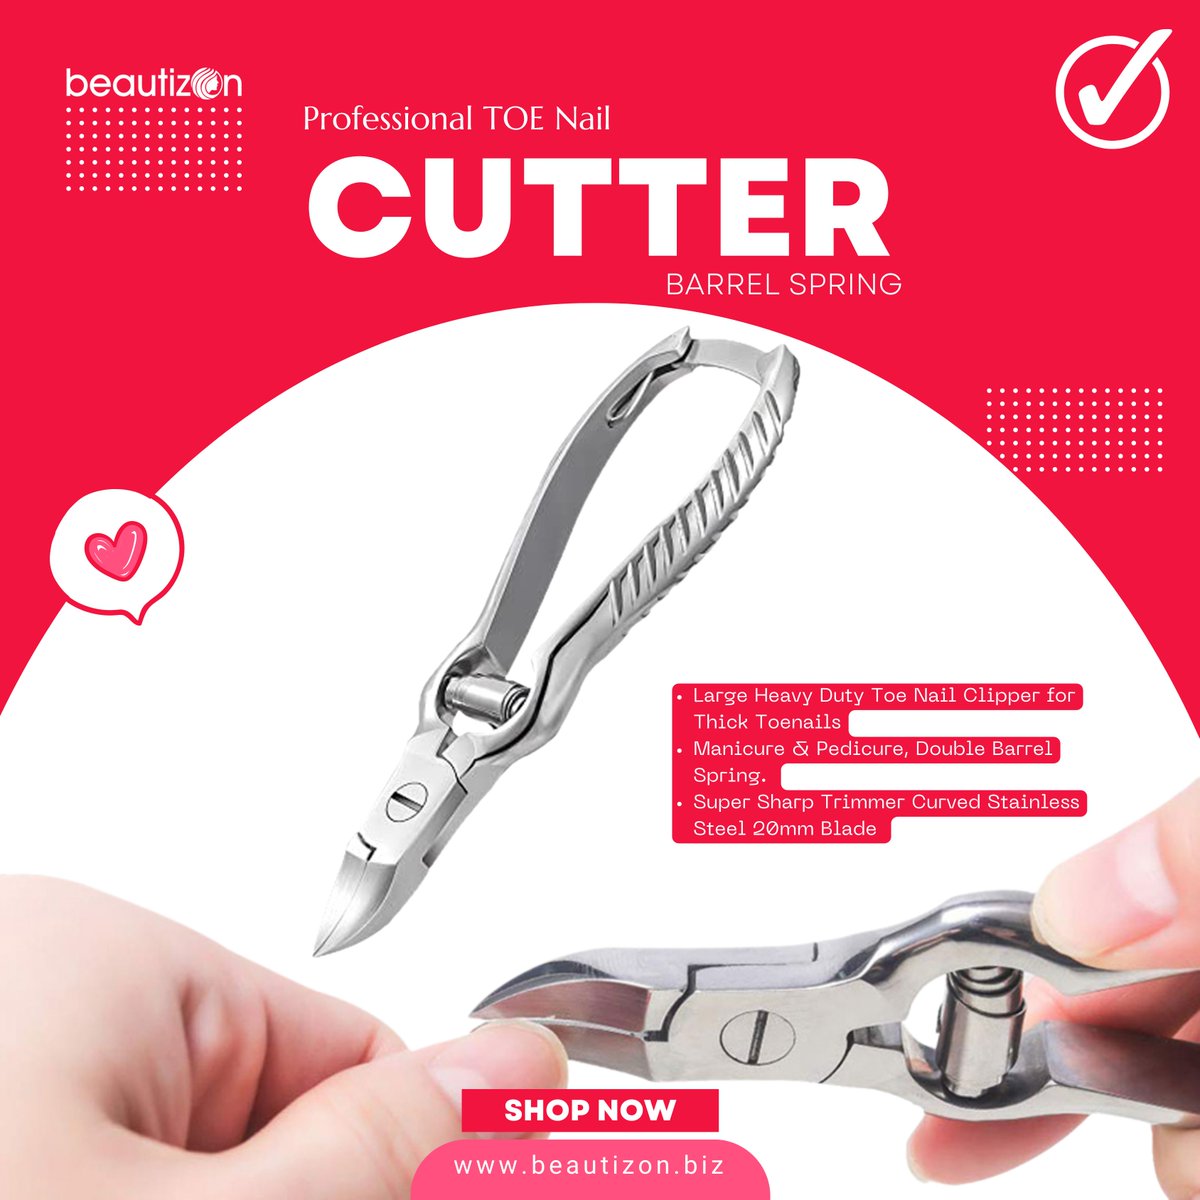 Say goodbye to painful ingrown toenails with our Toenail Cutter! 
#ToenailCutter #FootCare #IngrownToenails #PrecisionTool #ComfortableDesign #SayGoodbyeToPain #GameChanger